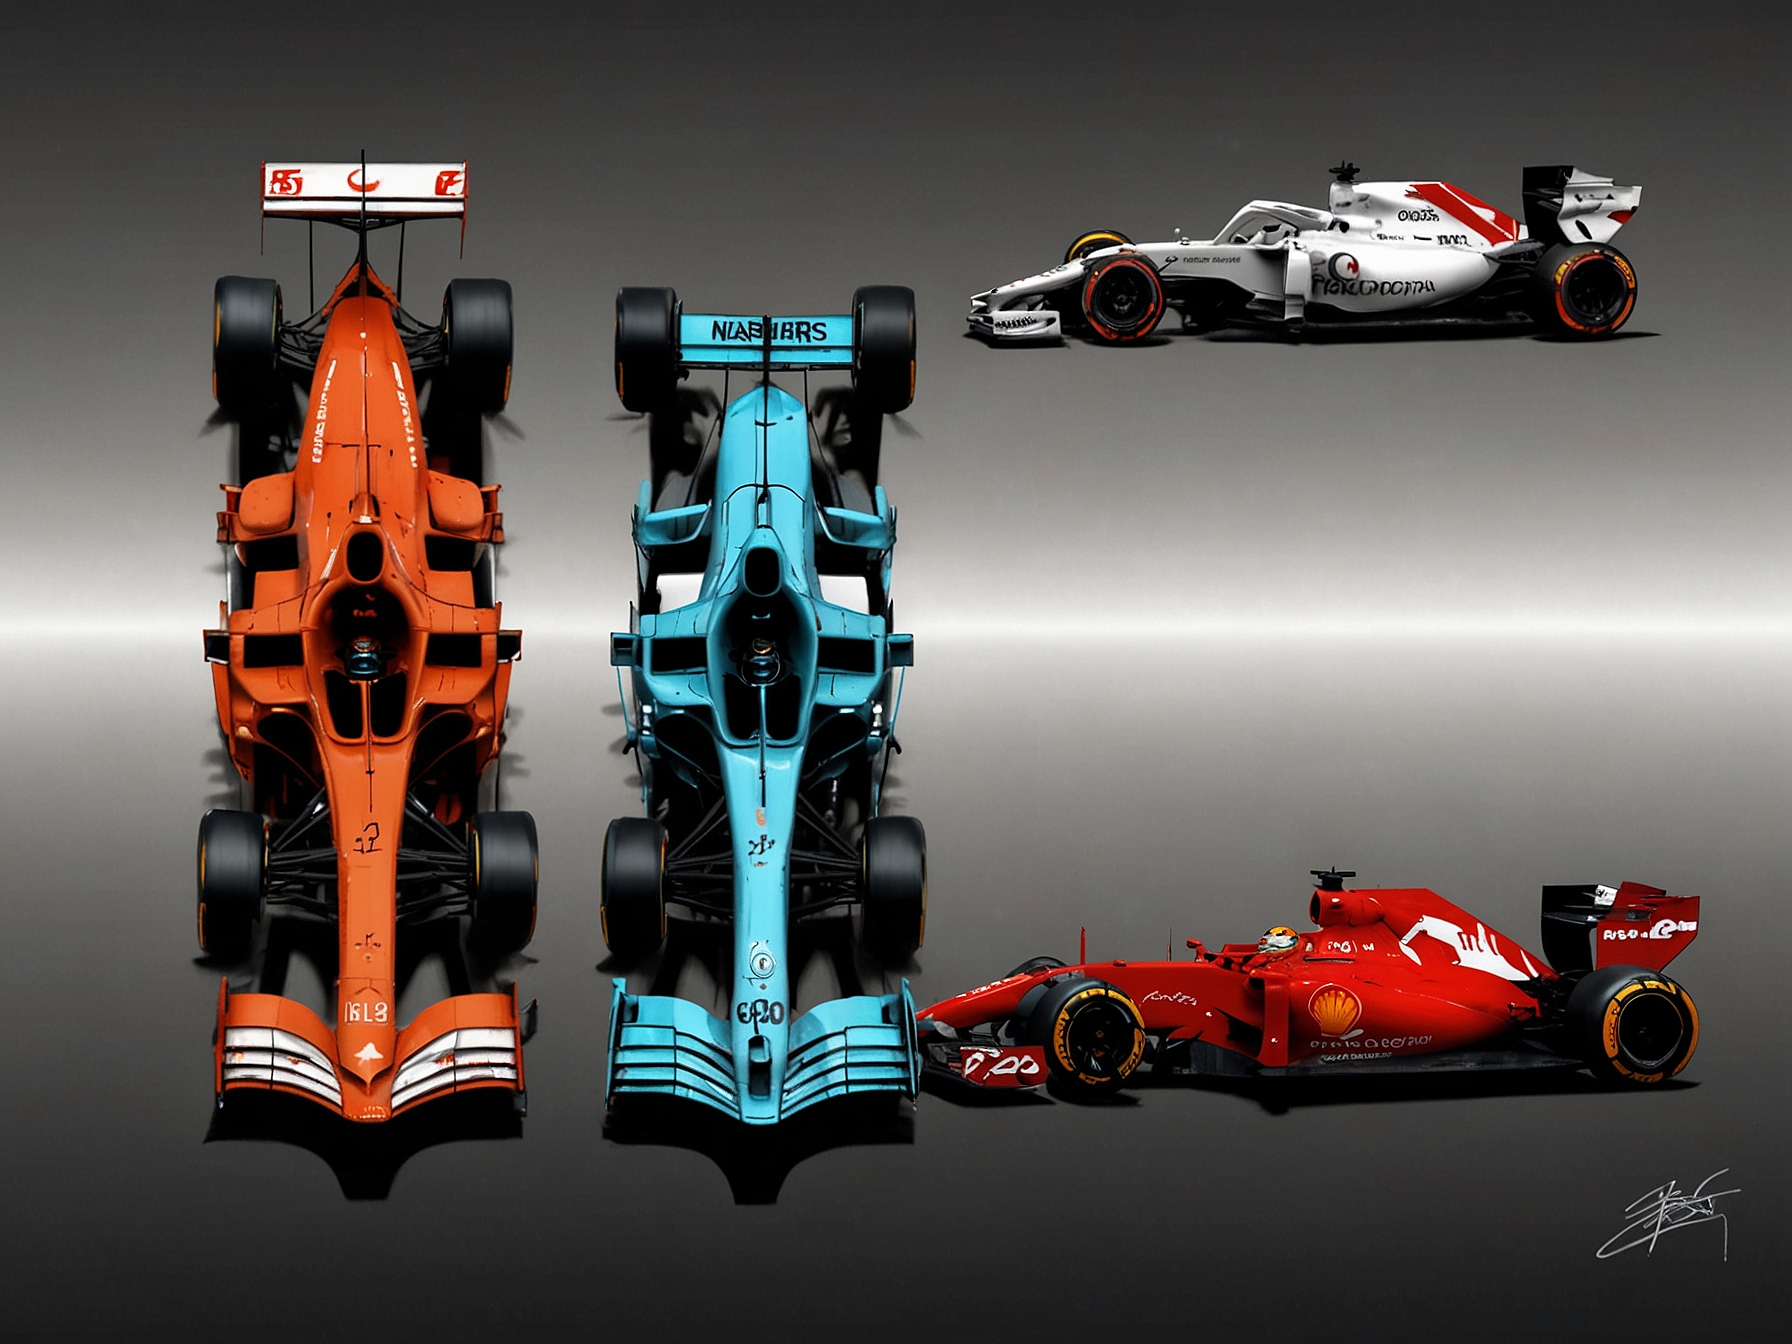 An illustrative comparison of Formula 1 cars highlighting the significant design changes set for the 2026 season.